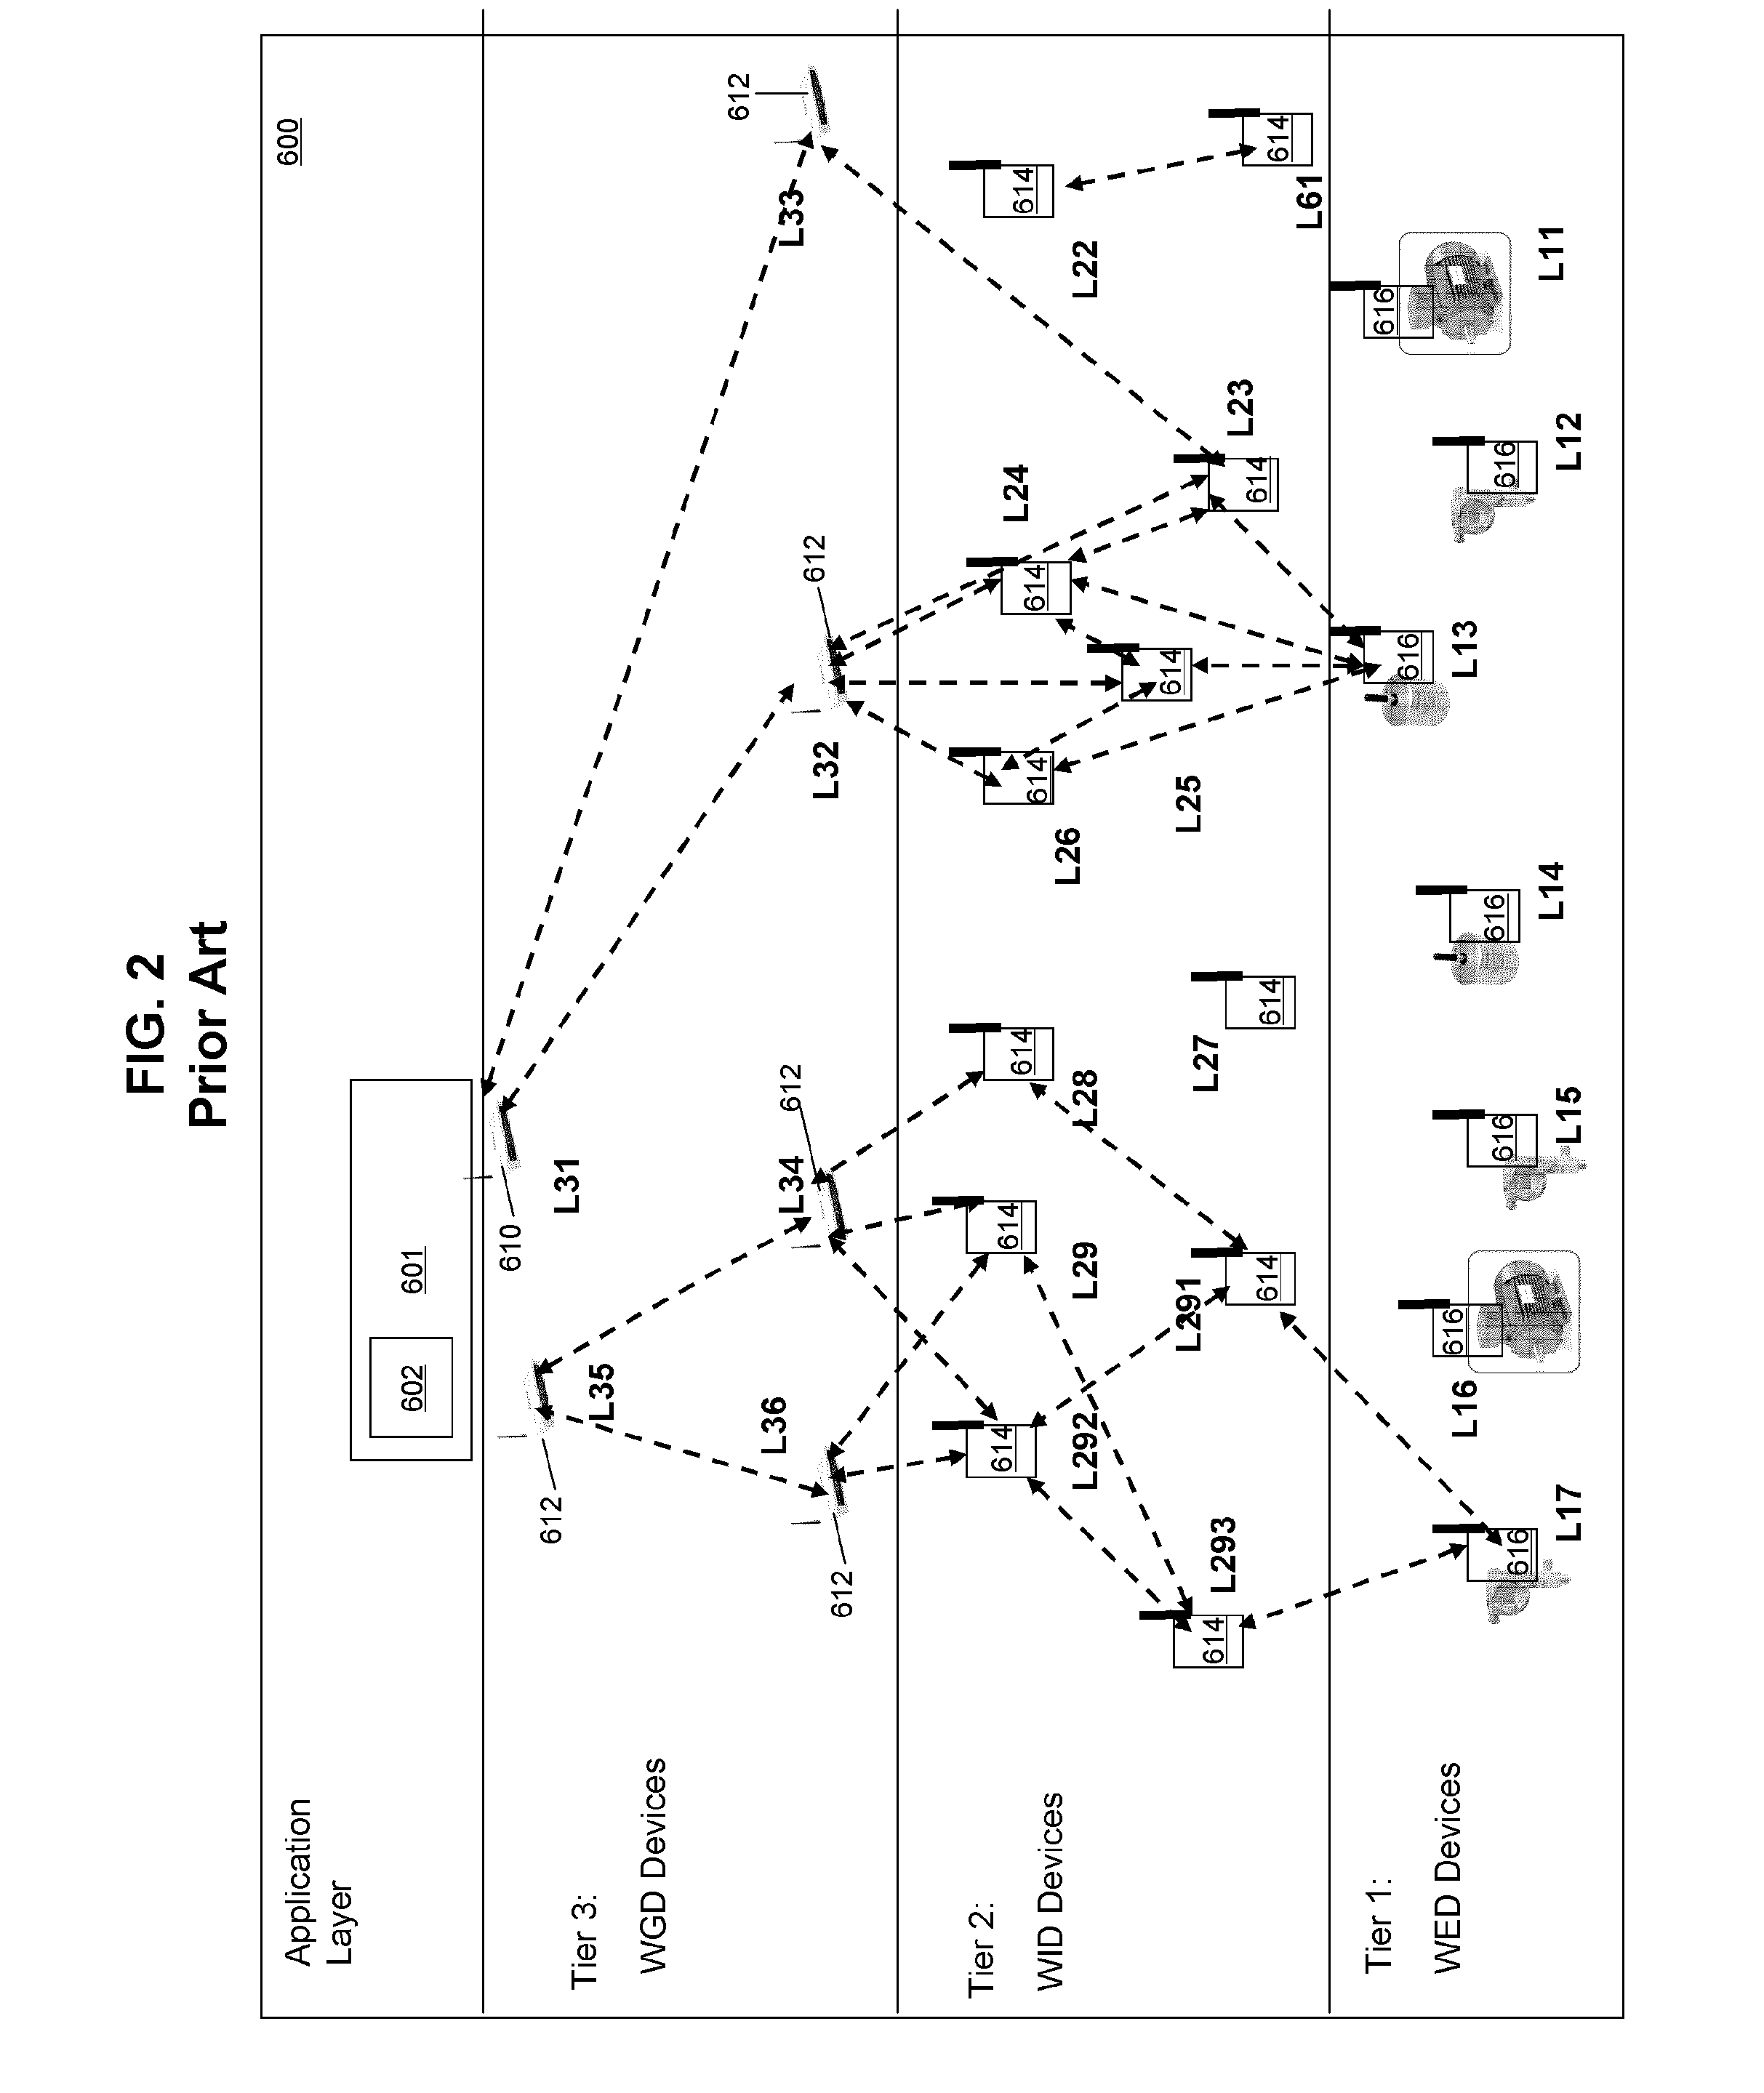 Adaptive hybrid wireless and wired process control system and method